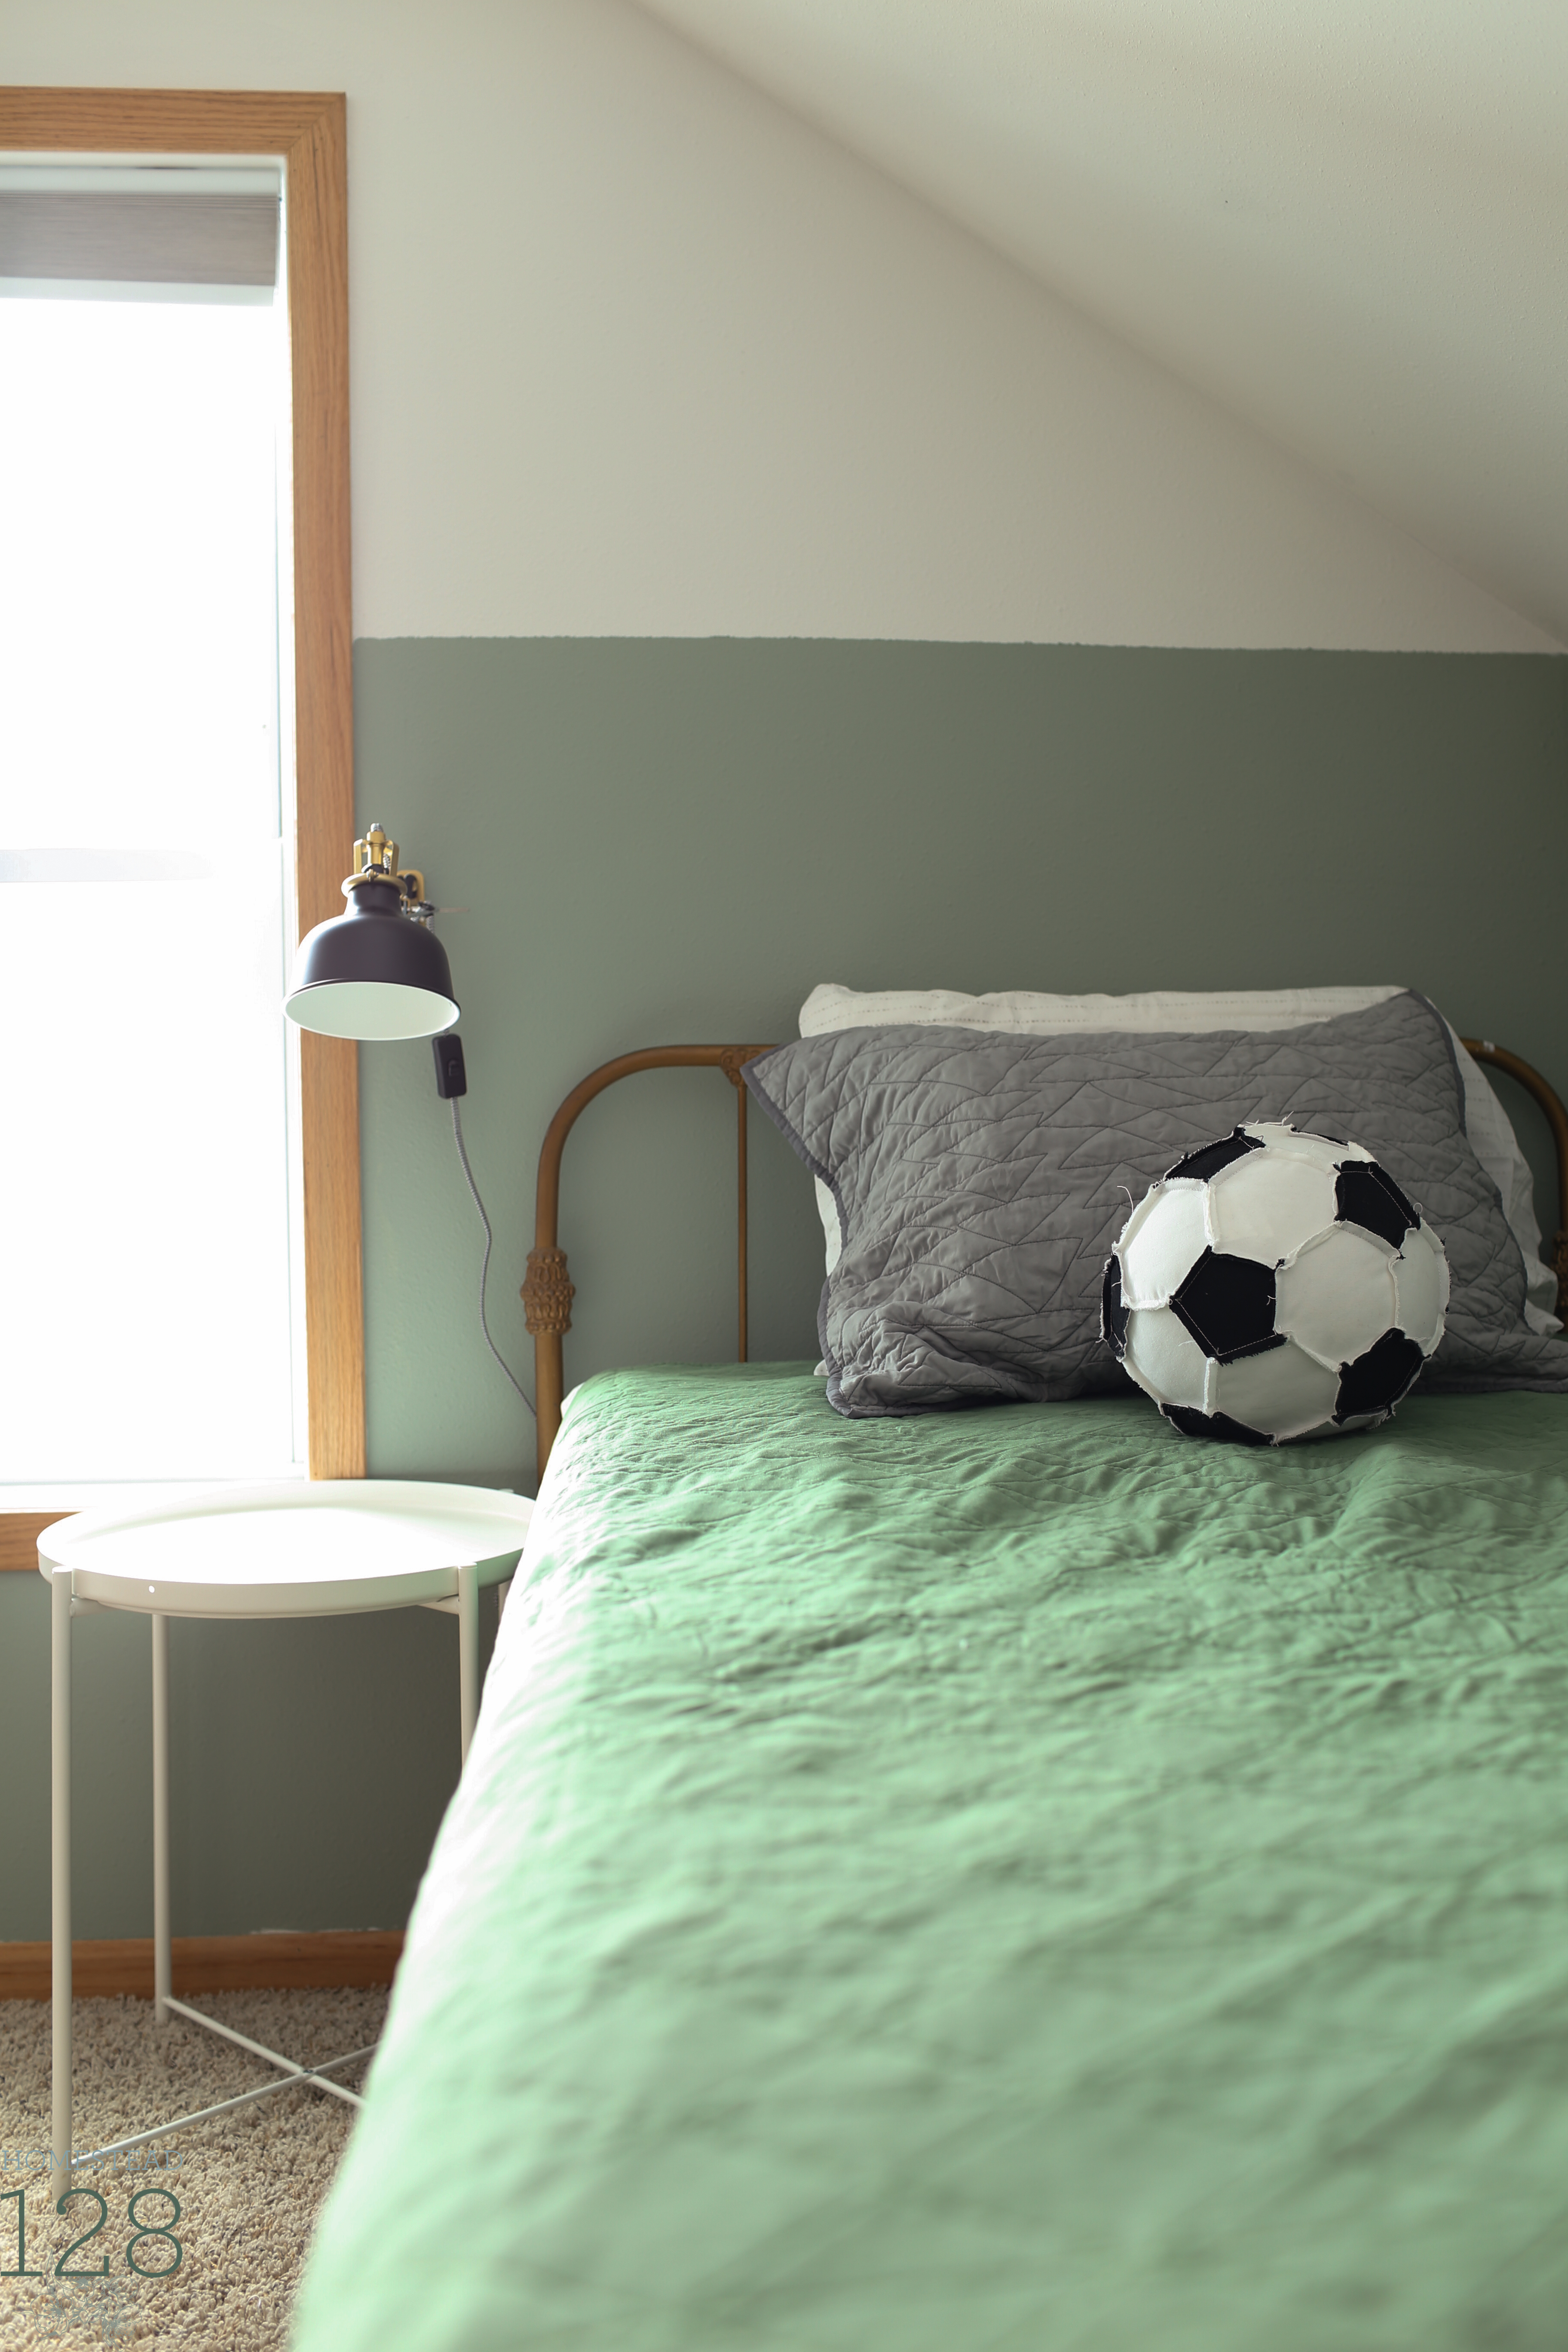 Boys bedroom wall sconce and green, gray and white colors.